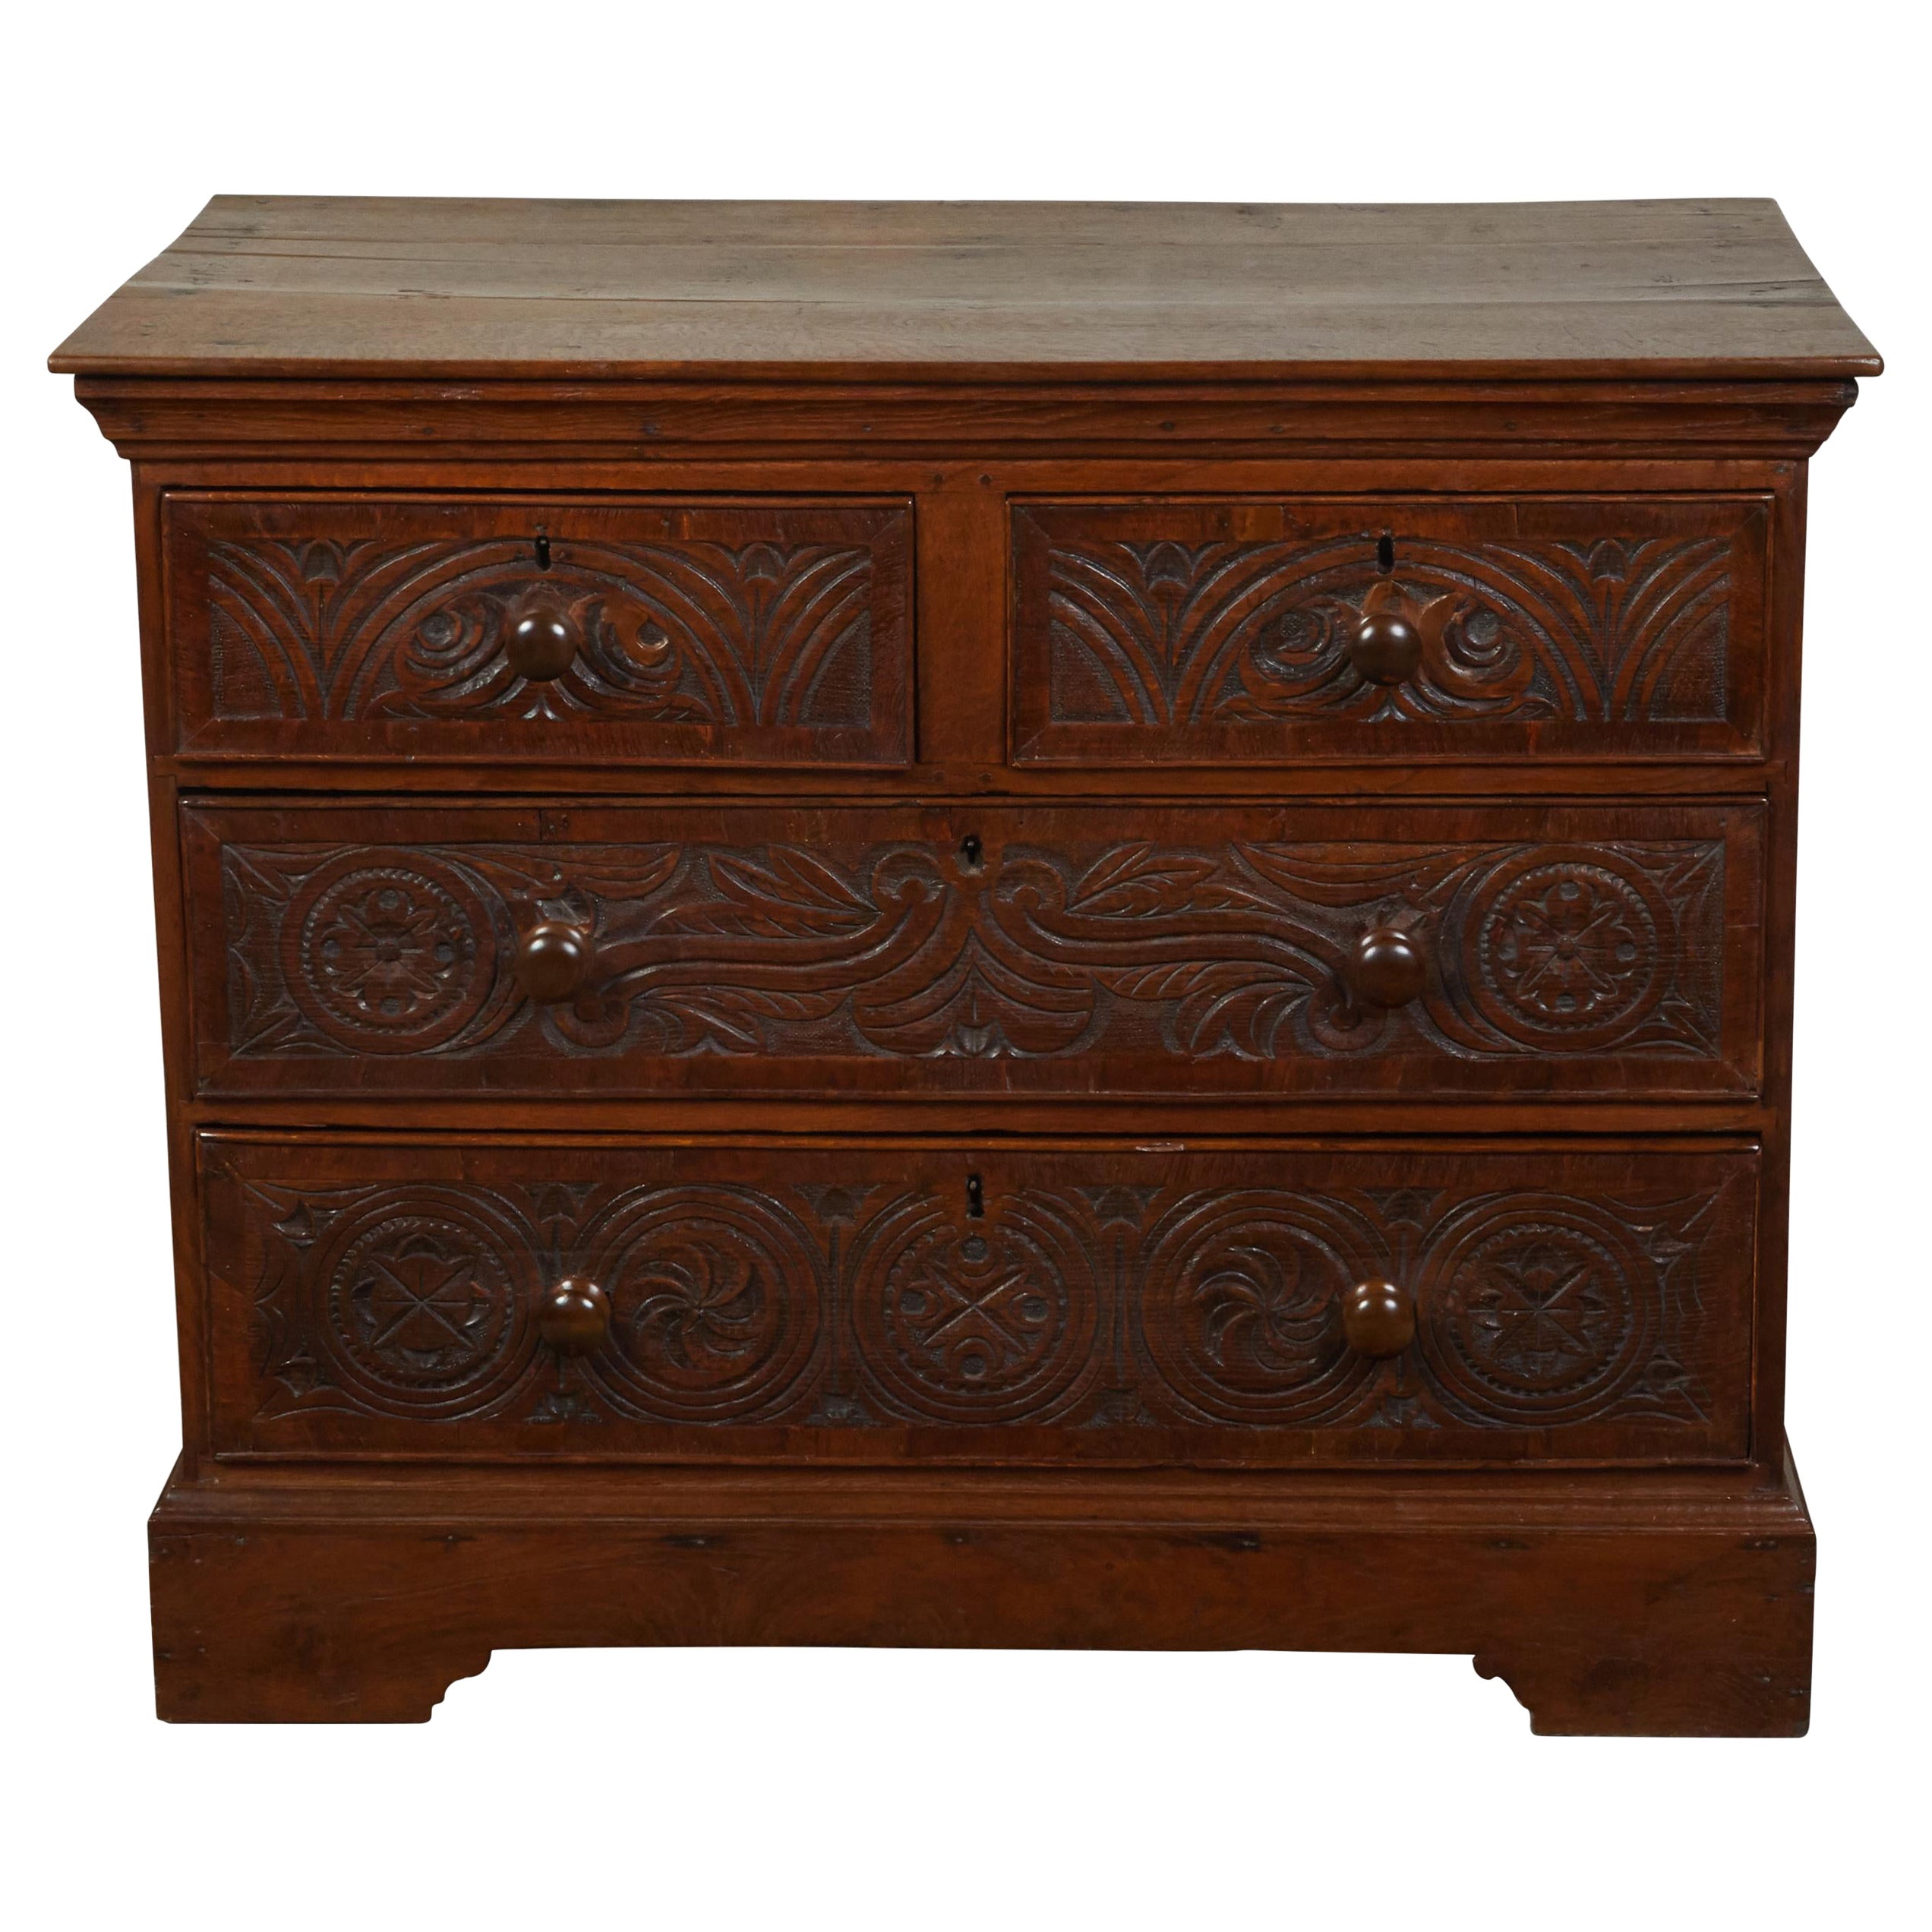 English Georgian Period 1800s Oak Chest with Four Drawers and Carved Motifs For Sale